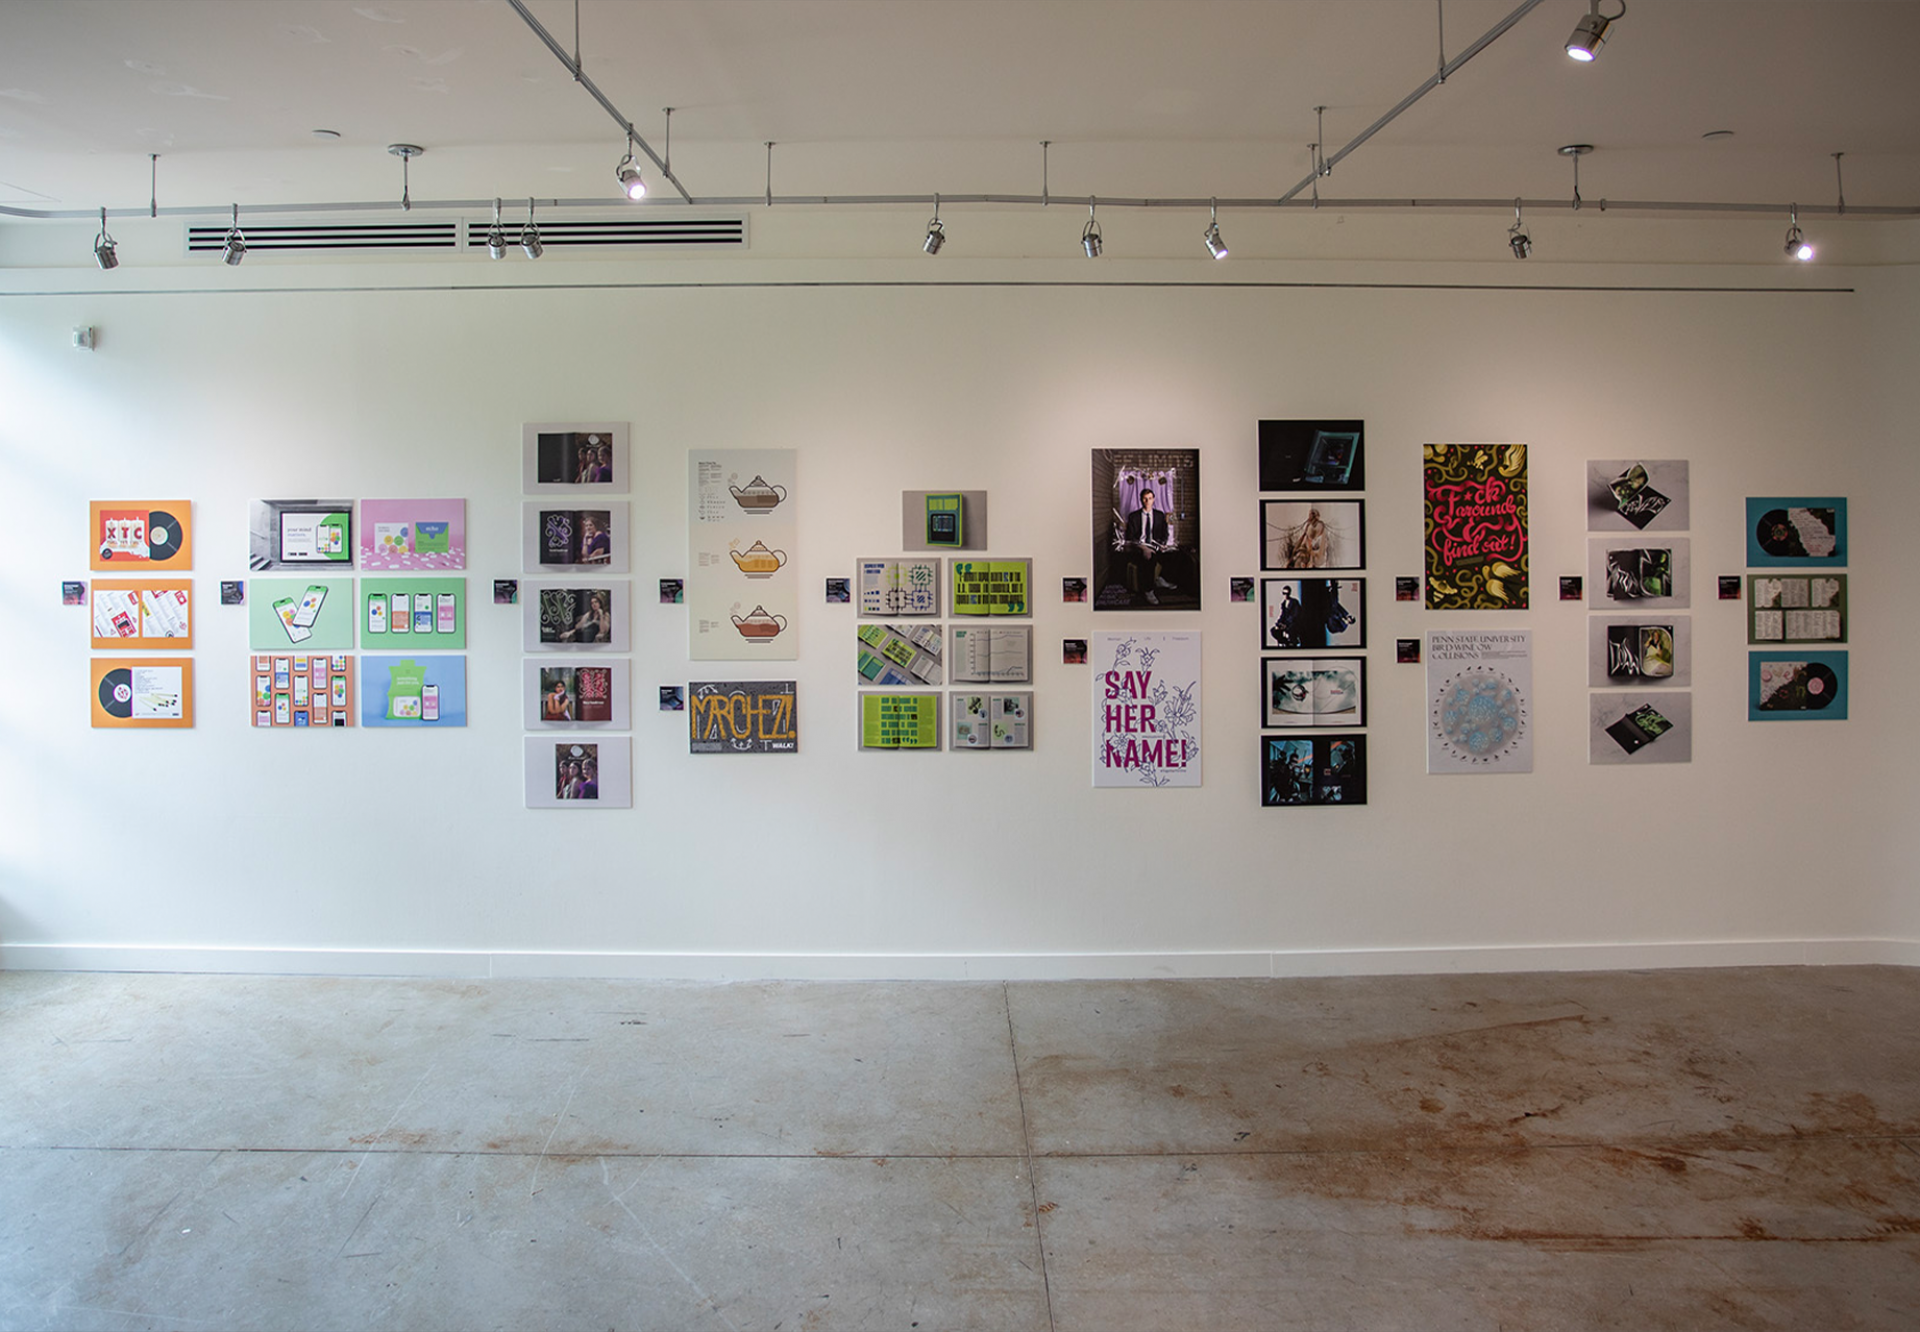 Graphic design student projects hung as part of an exhibition on a gallery wall.